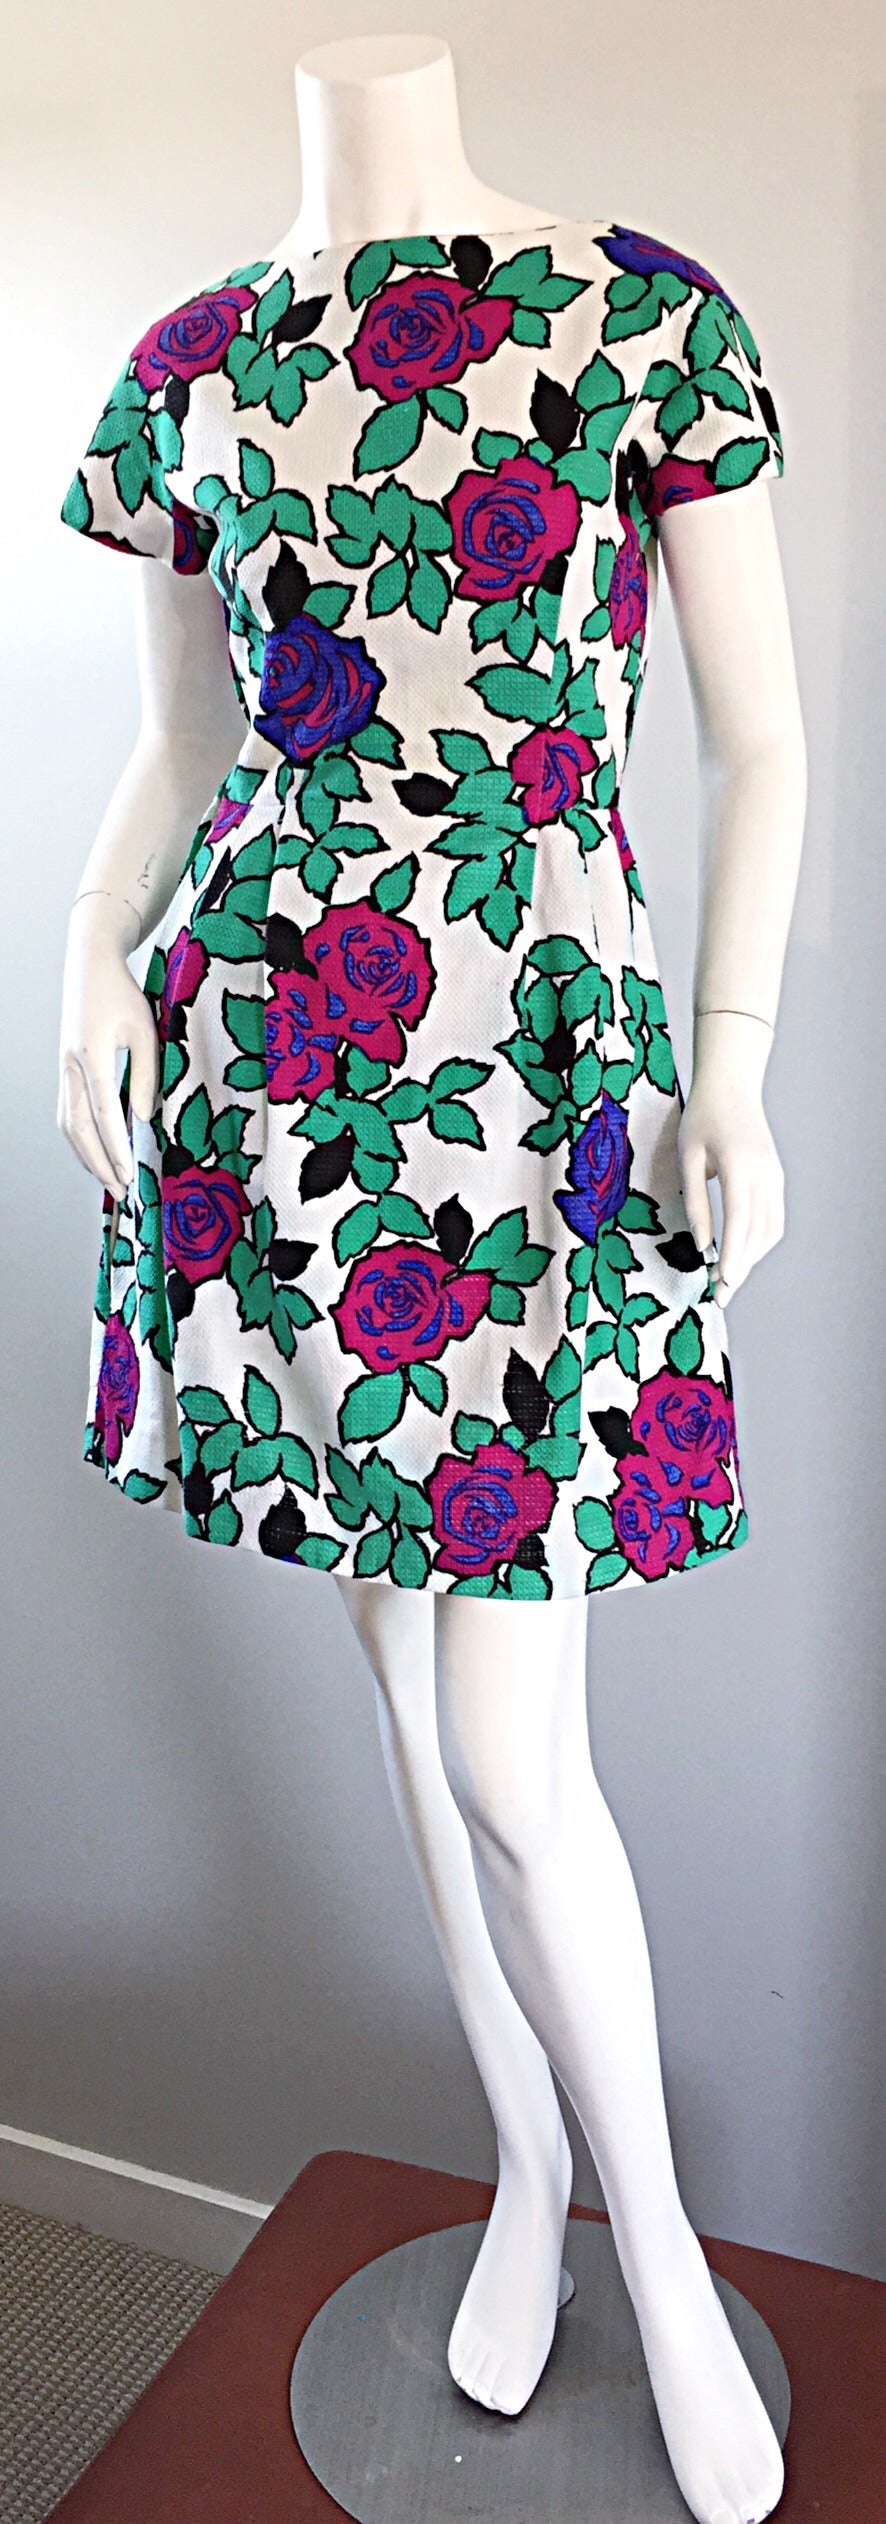 Adorable late 50s cotton dress! Vibrant 3-D flowers and leaves print throughout. Slightly flounced skirt. White honeycomb cotton, with a full metal zipper down the side. Looks great alone, or belted. In great condition. Approximately Size